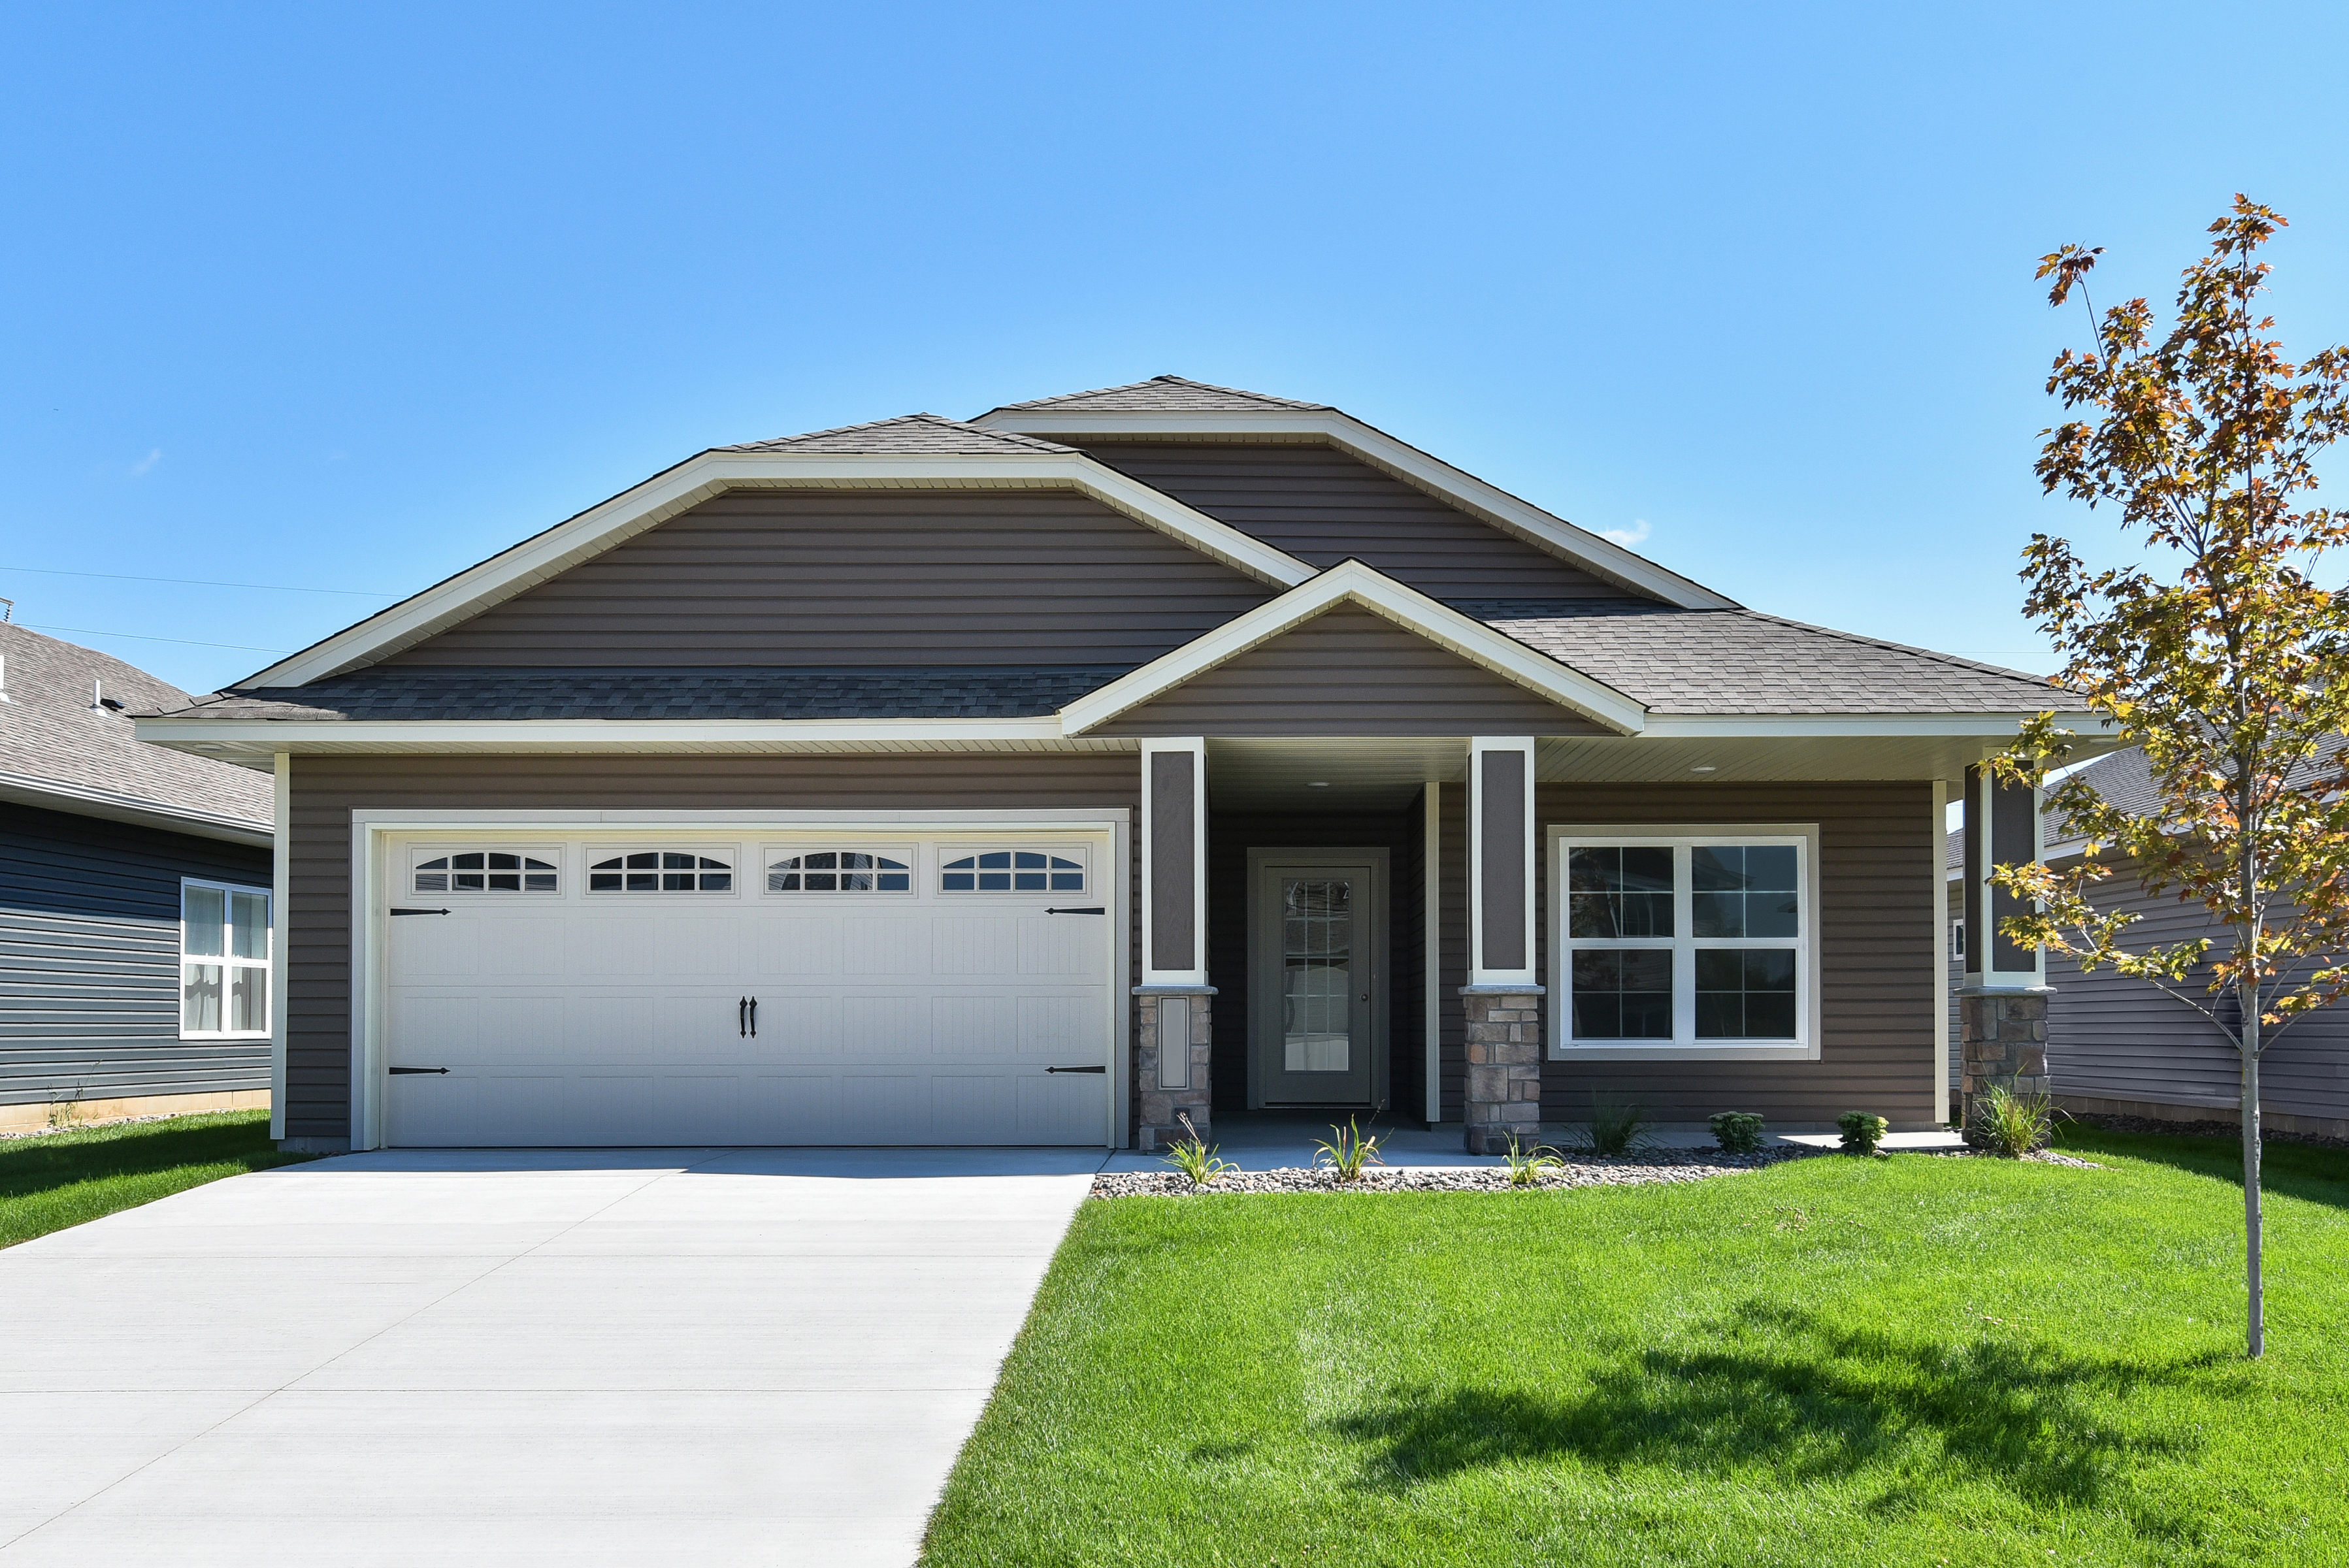 The St. Timothy plan by LGI Homes at Meadows North